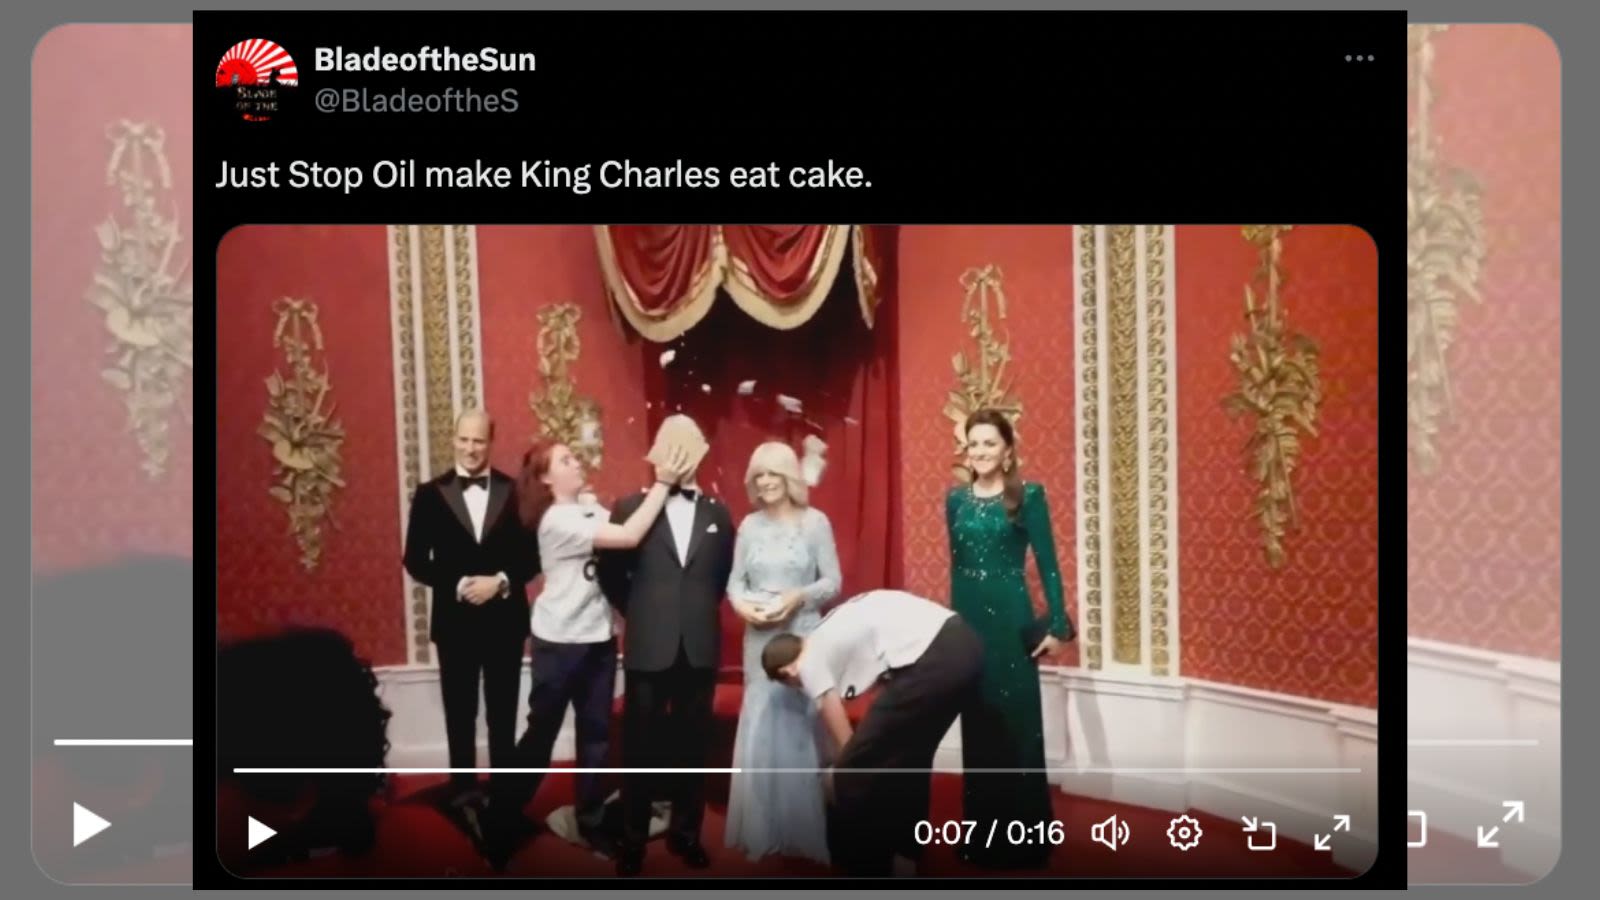 Fact Check: Posts Claiming This Vid Shows Kate Middleton Fans Throwing Cake in King Charles' Face Are Wrong